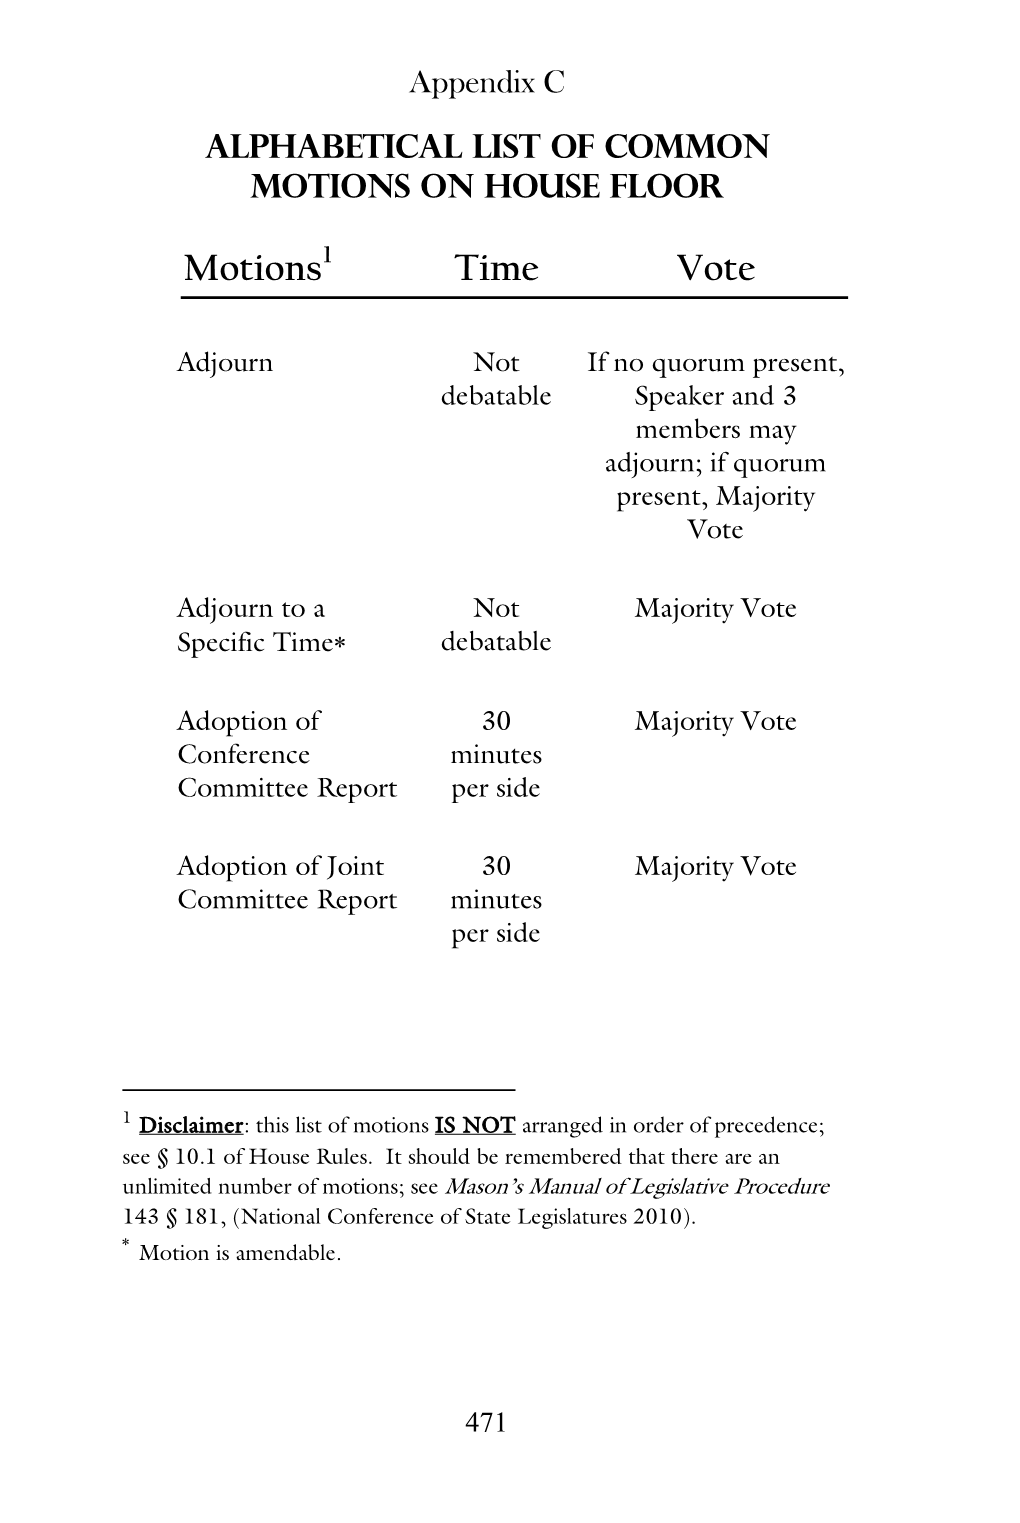 Motions Typically Used on House Floor, Alphabetical Order